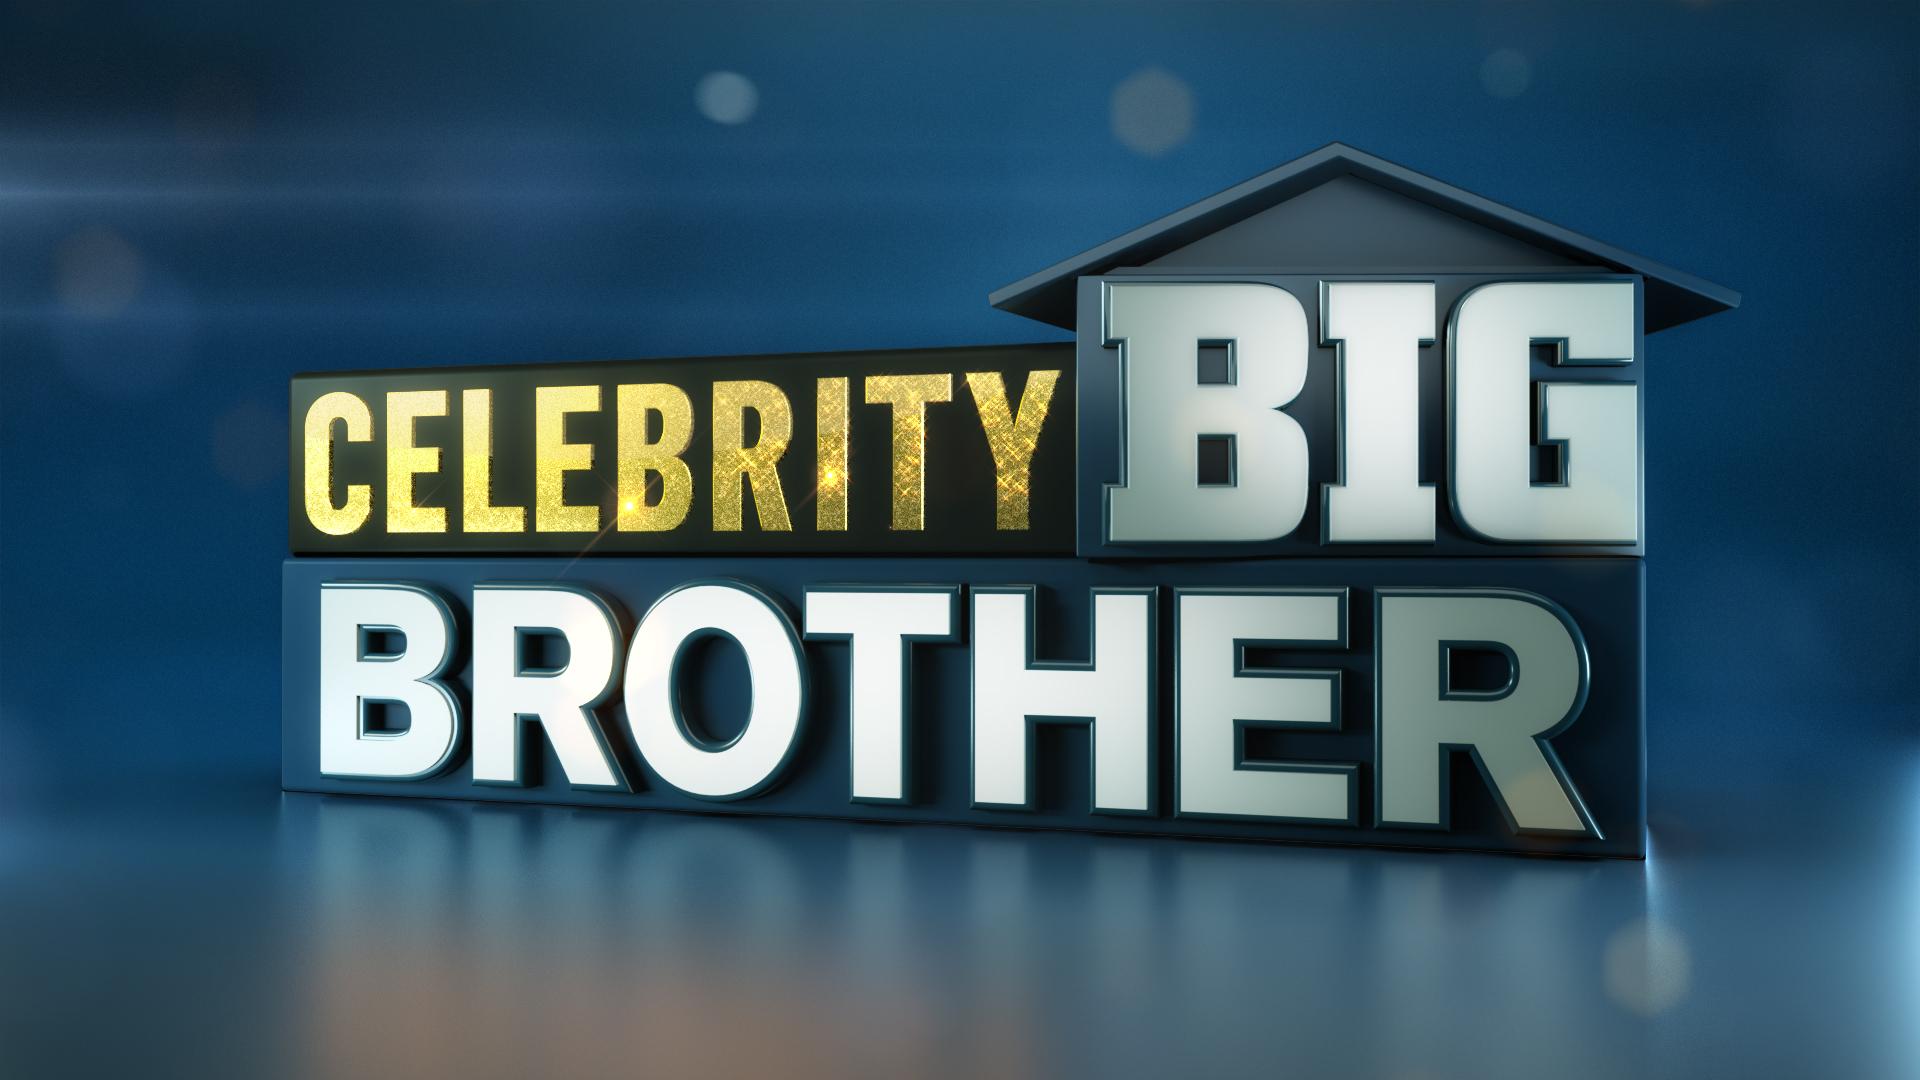 Big Brother Celebrity Edition TV Show on CBS (Cancelled or Renewed